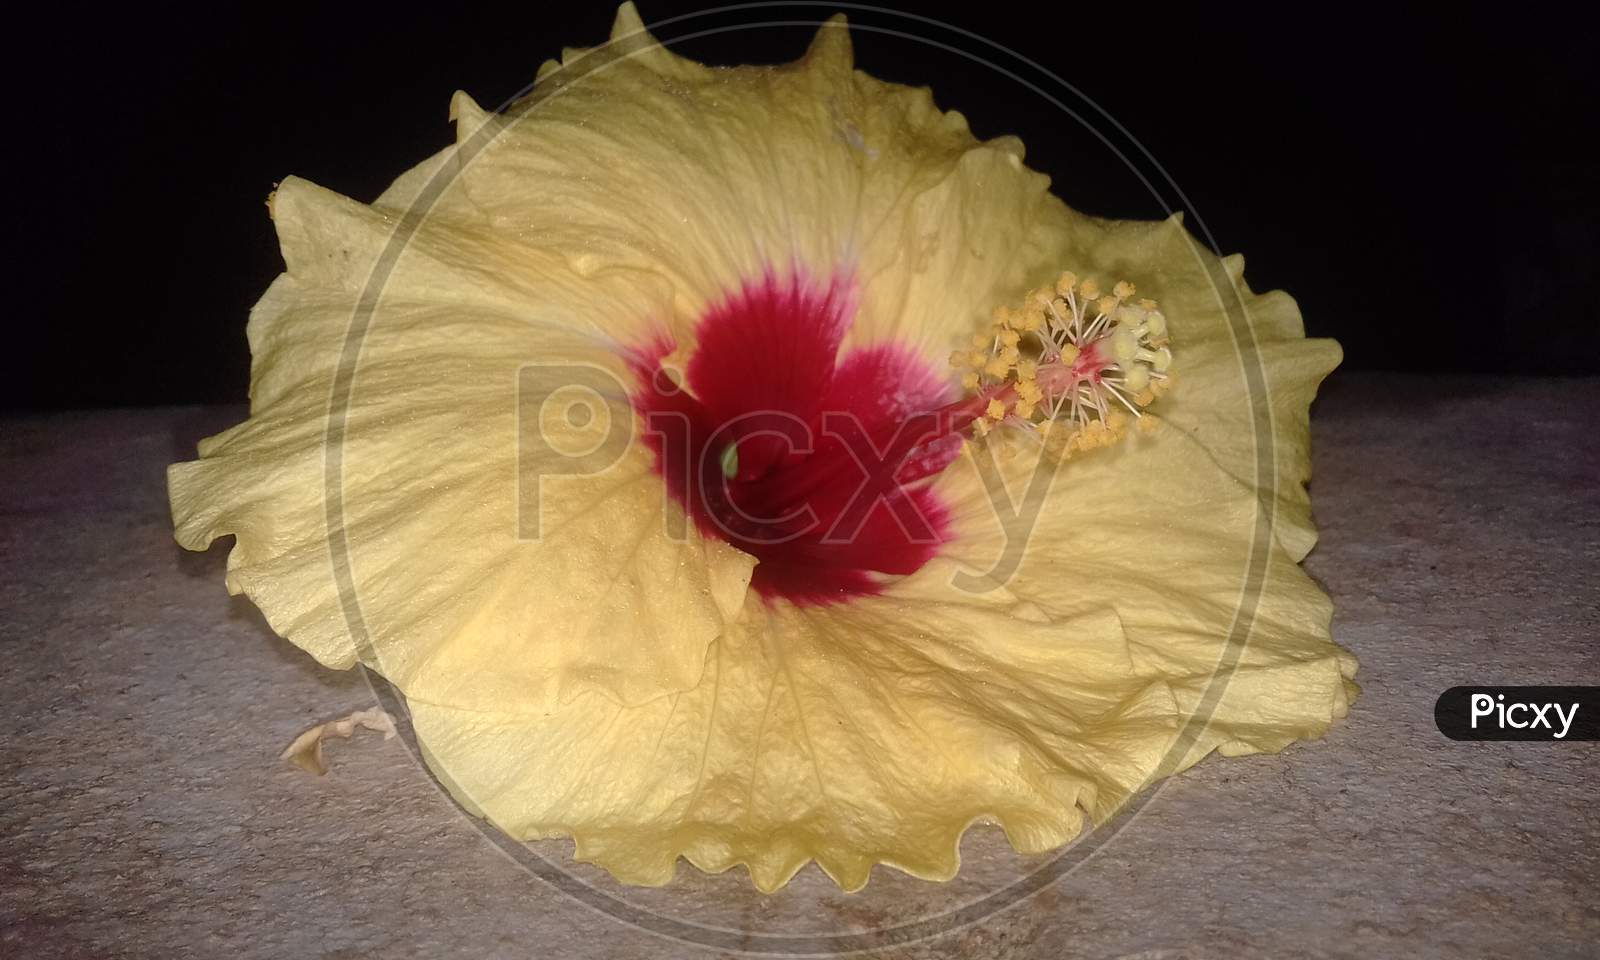 Chinese hibiscus a beautiful yellow flower